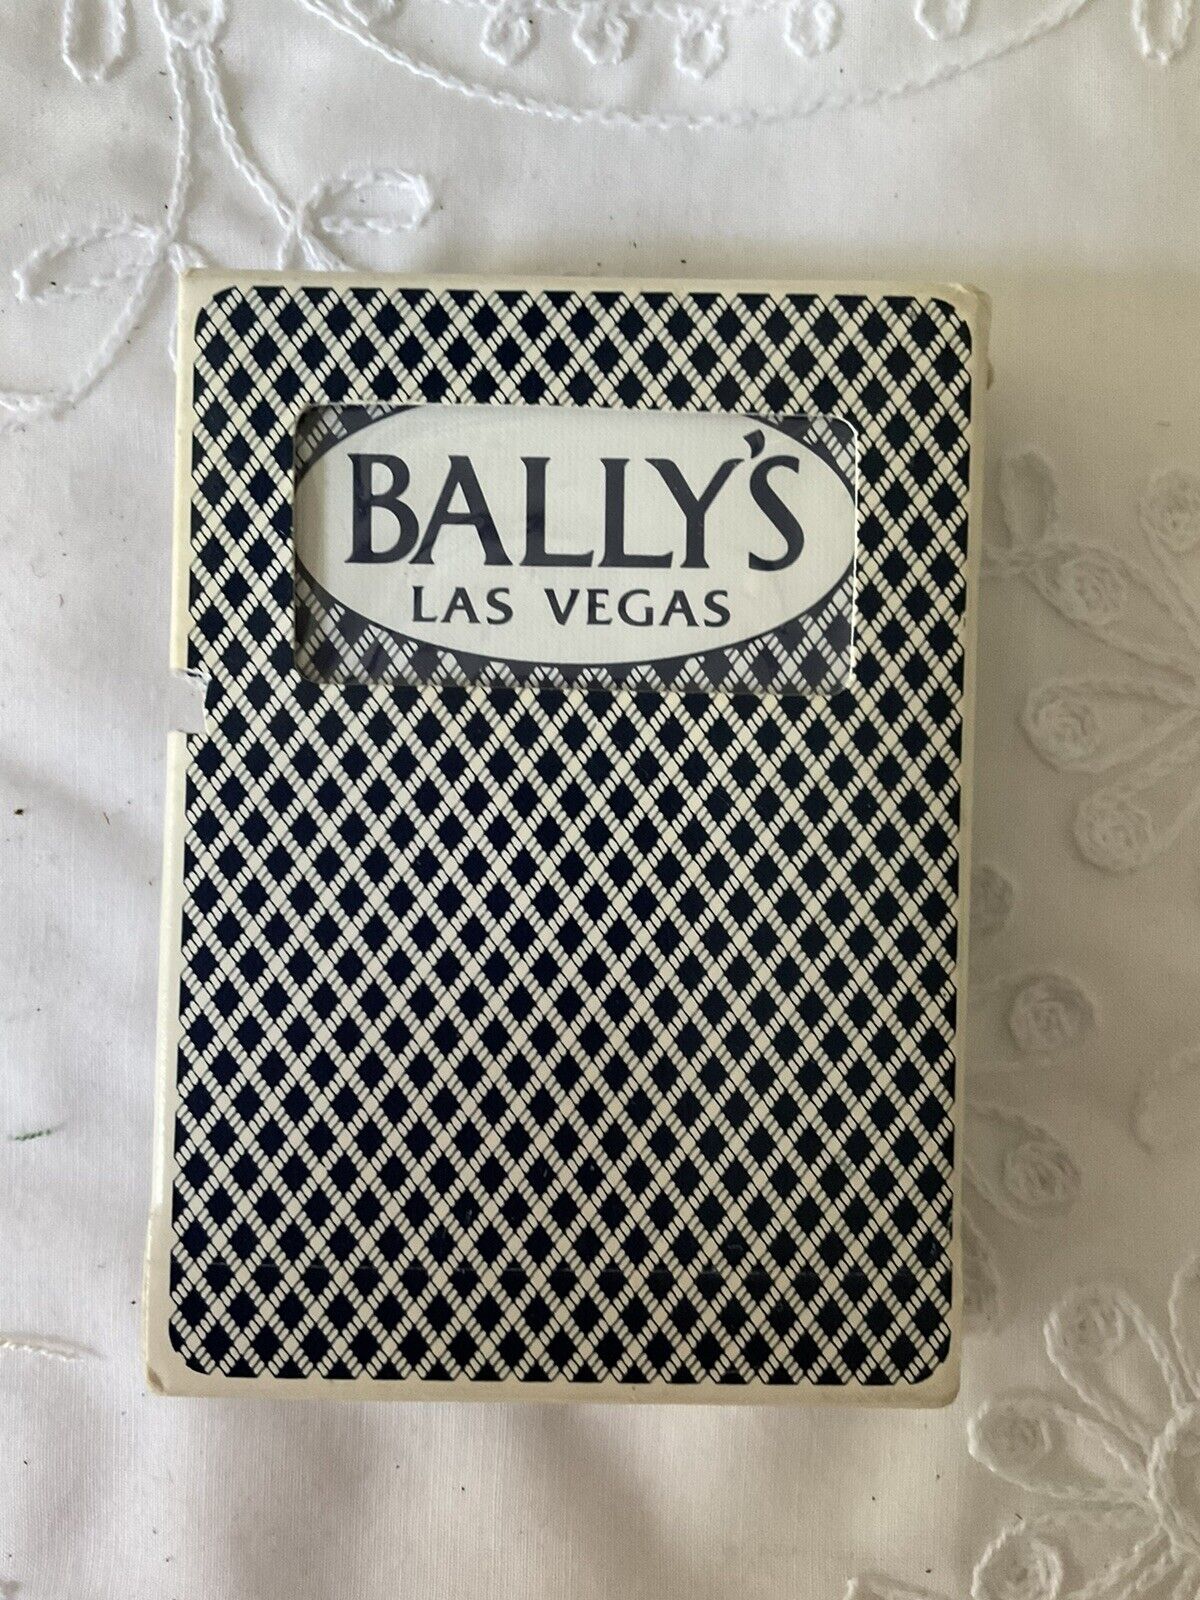 Vintage Bally's Casino Playing Cards Las Vegas Blue Dealers Has Gold Seal Used